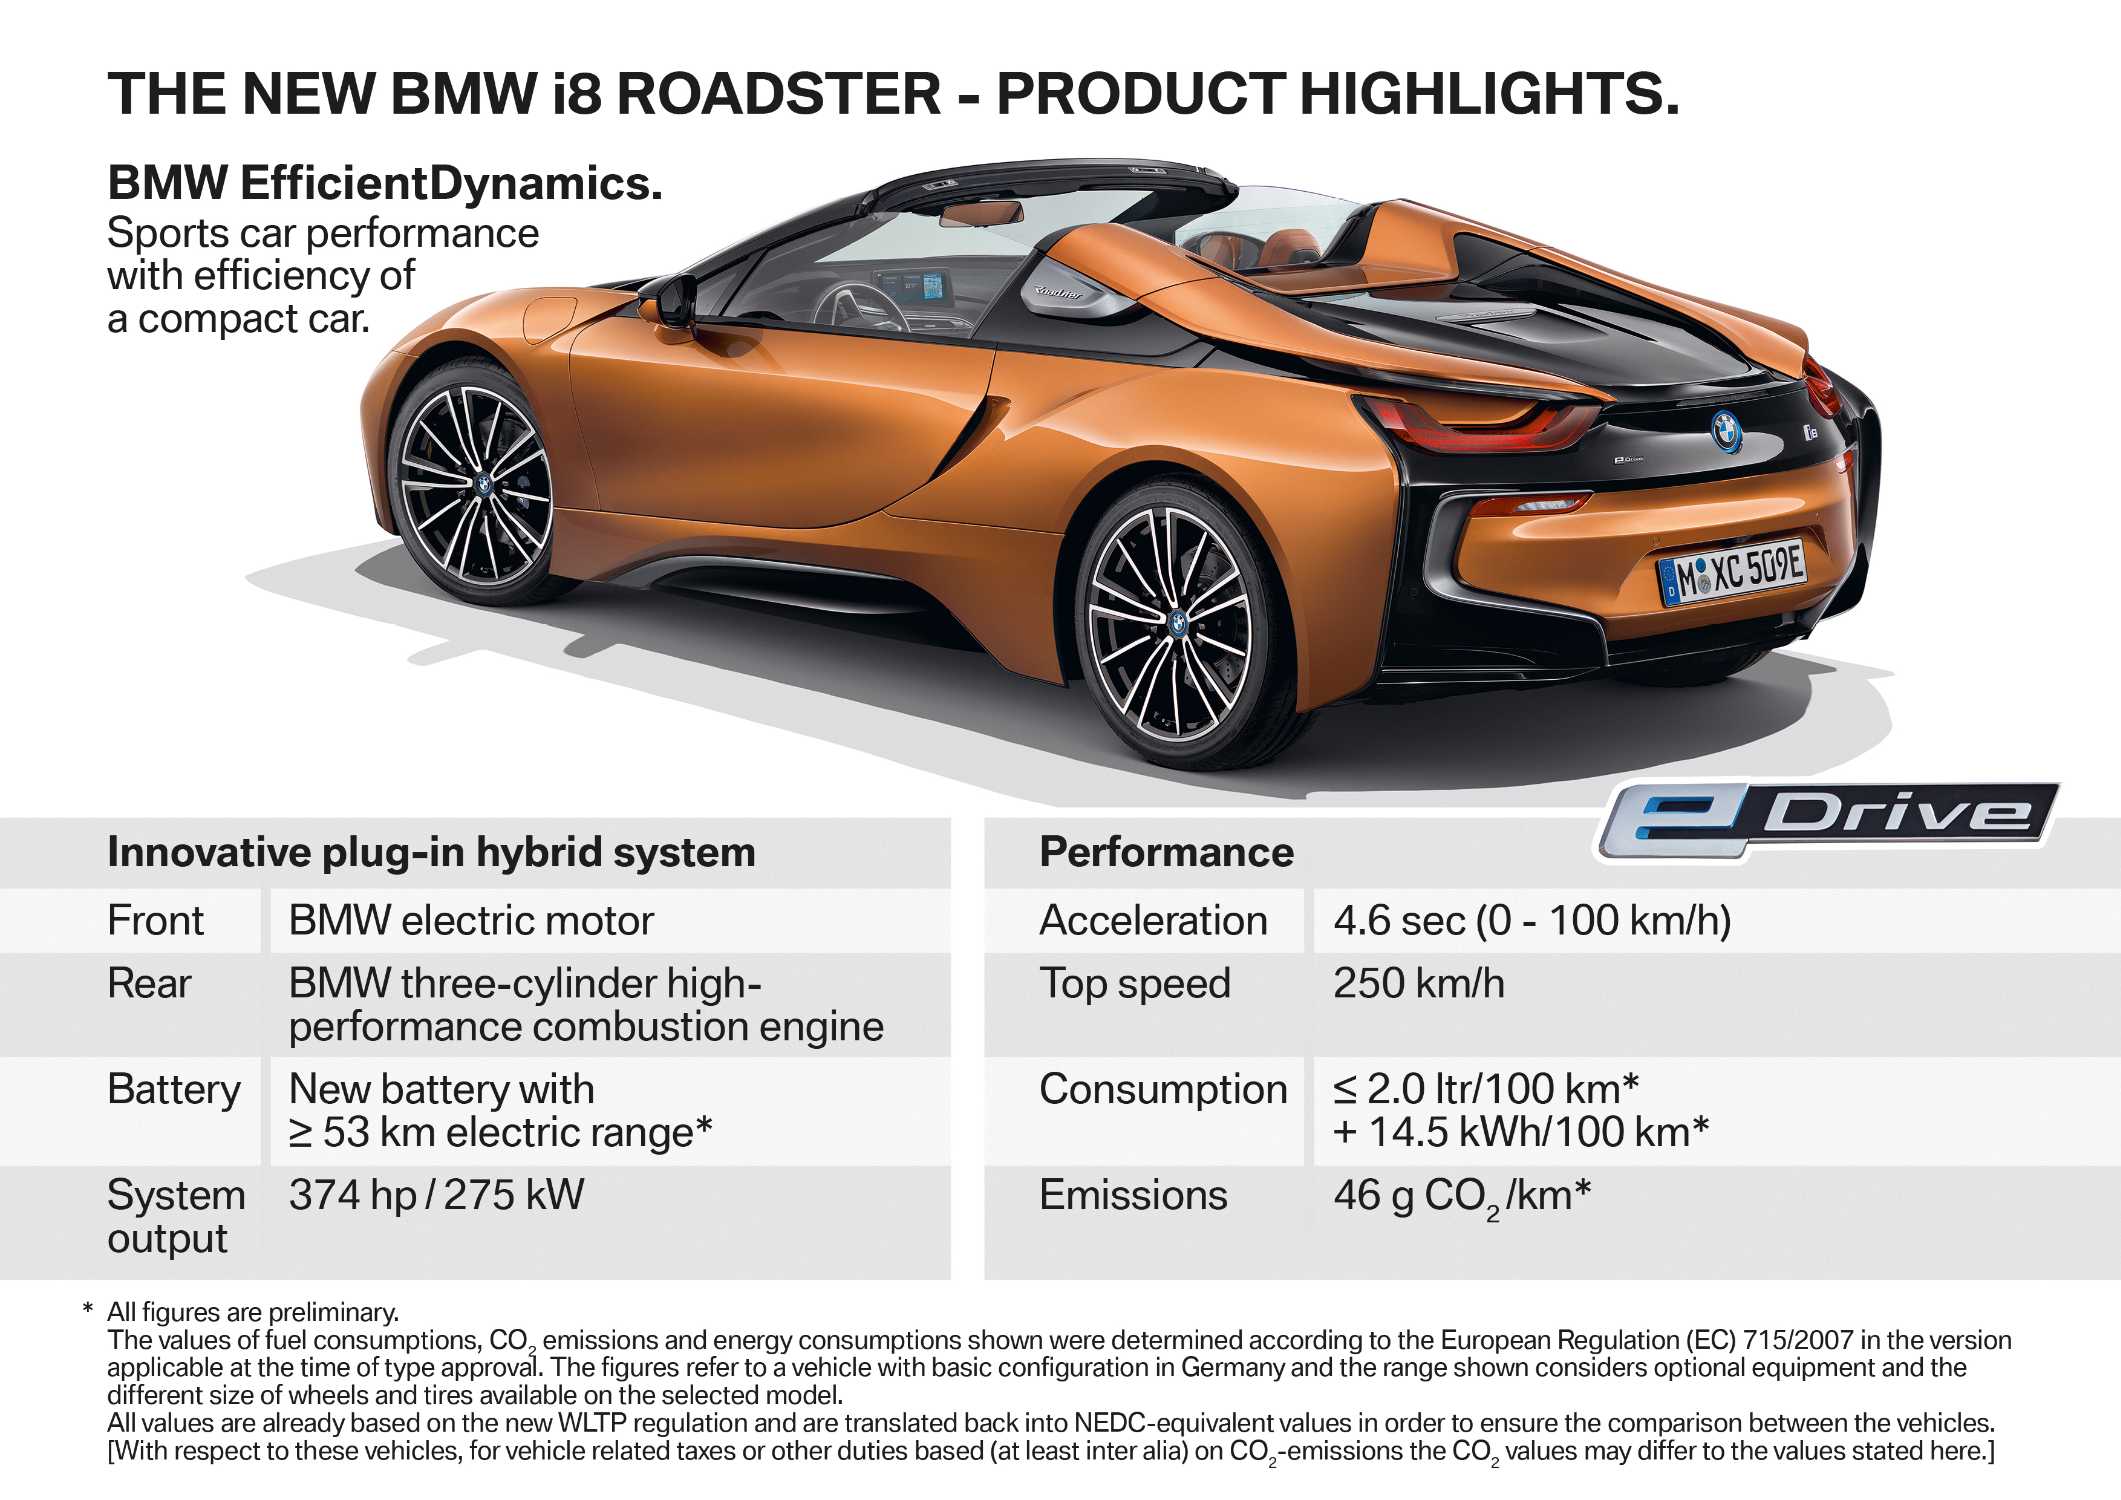 The new BMW i8 Roadster - Product Highlights. (11/2017)